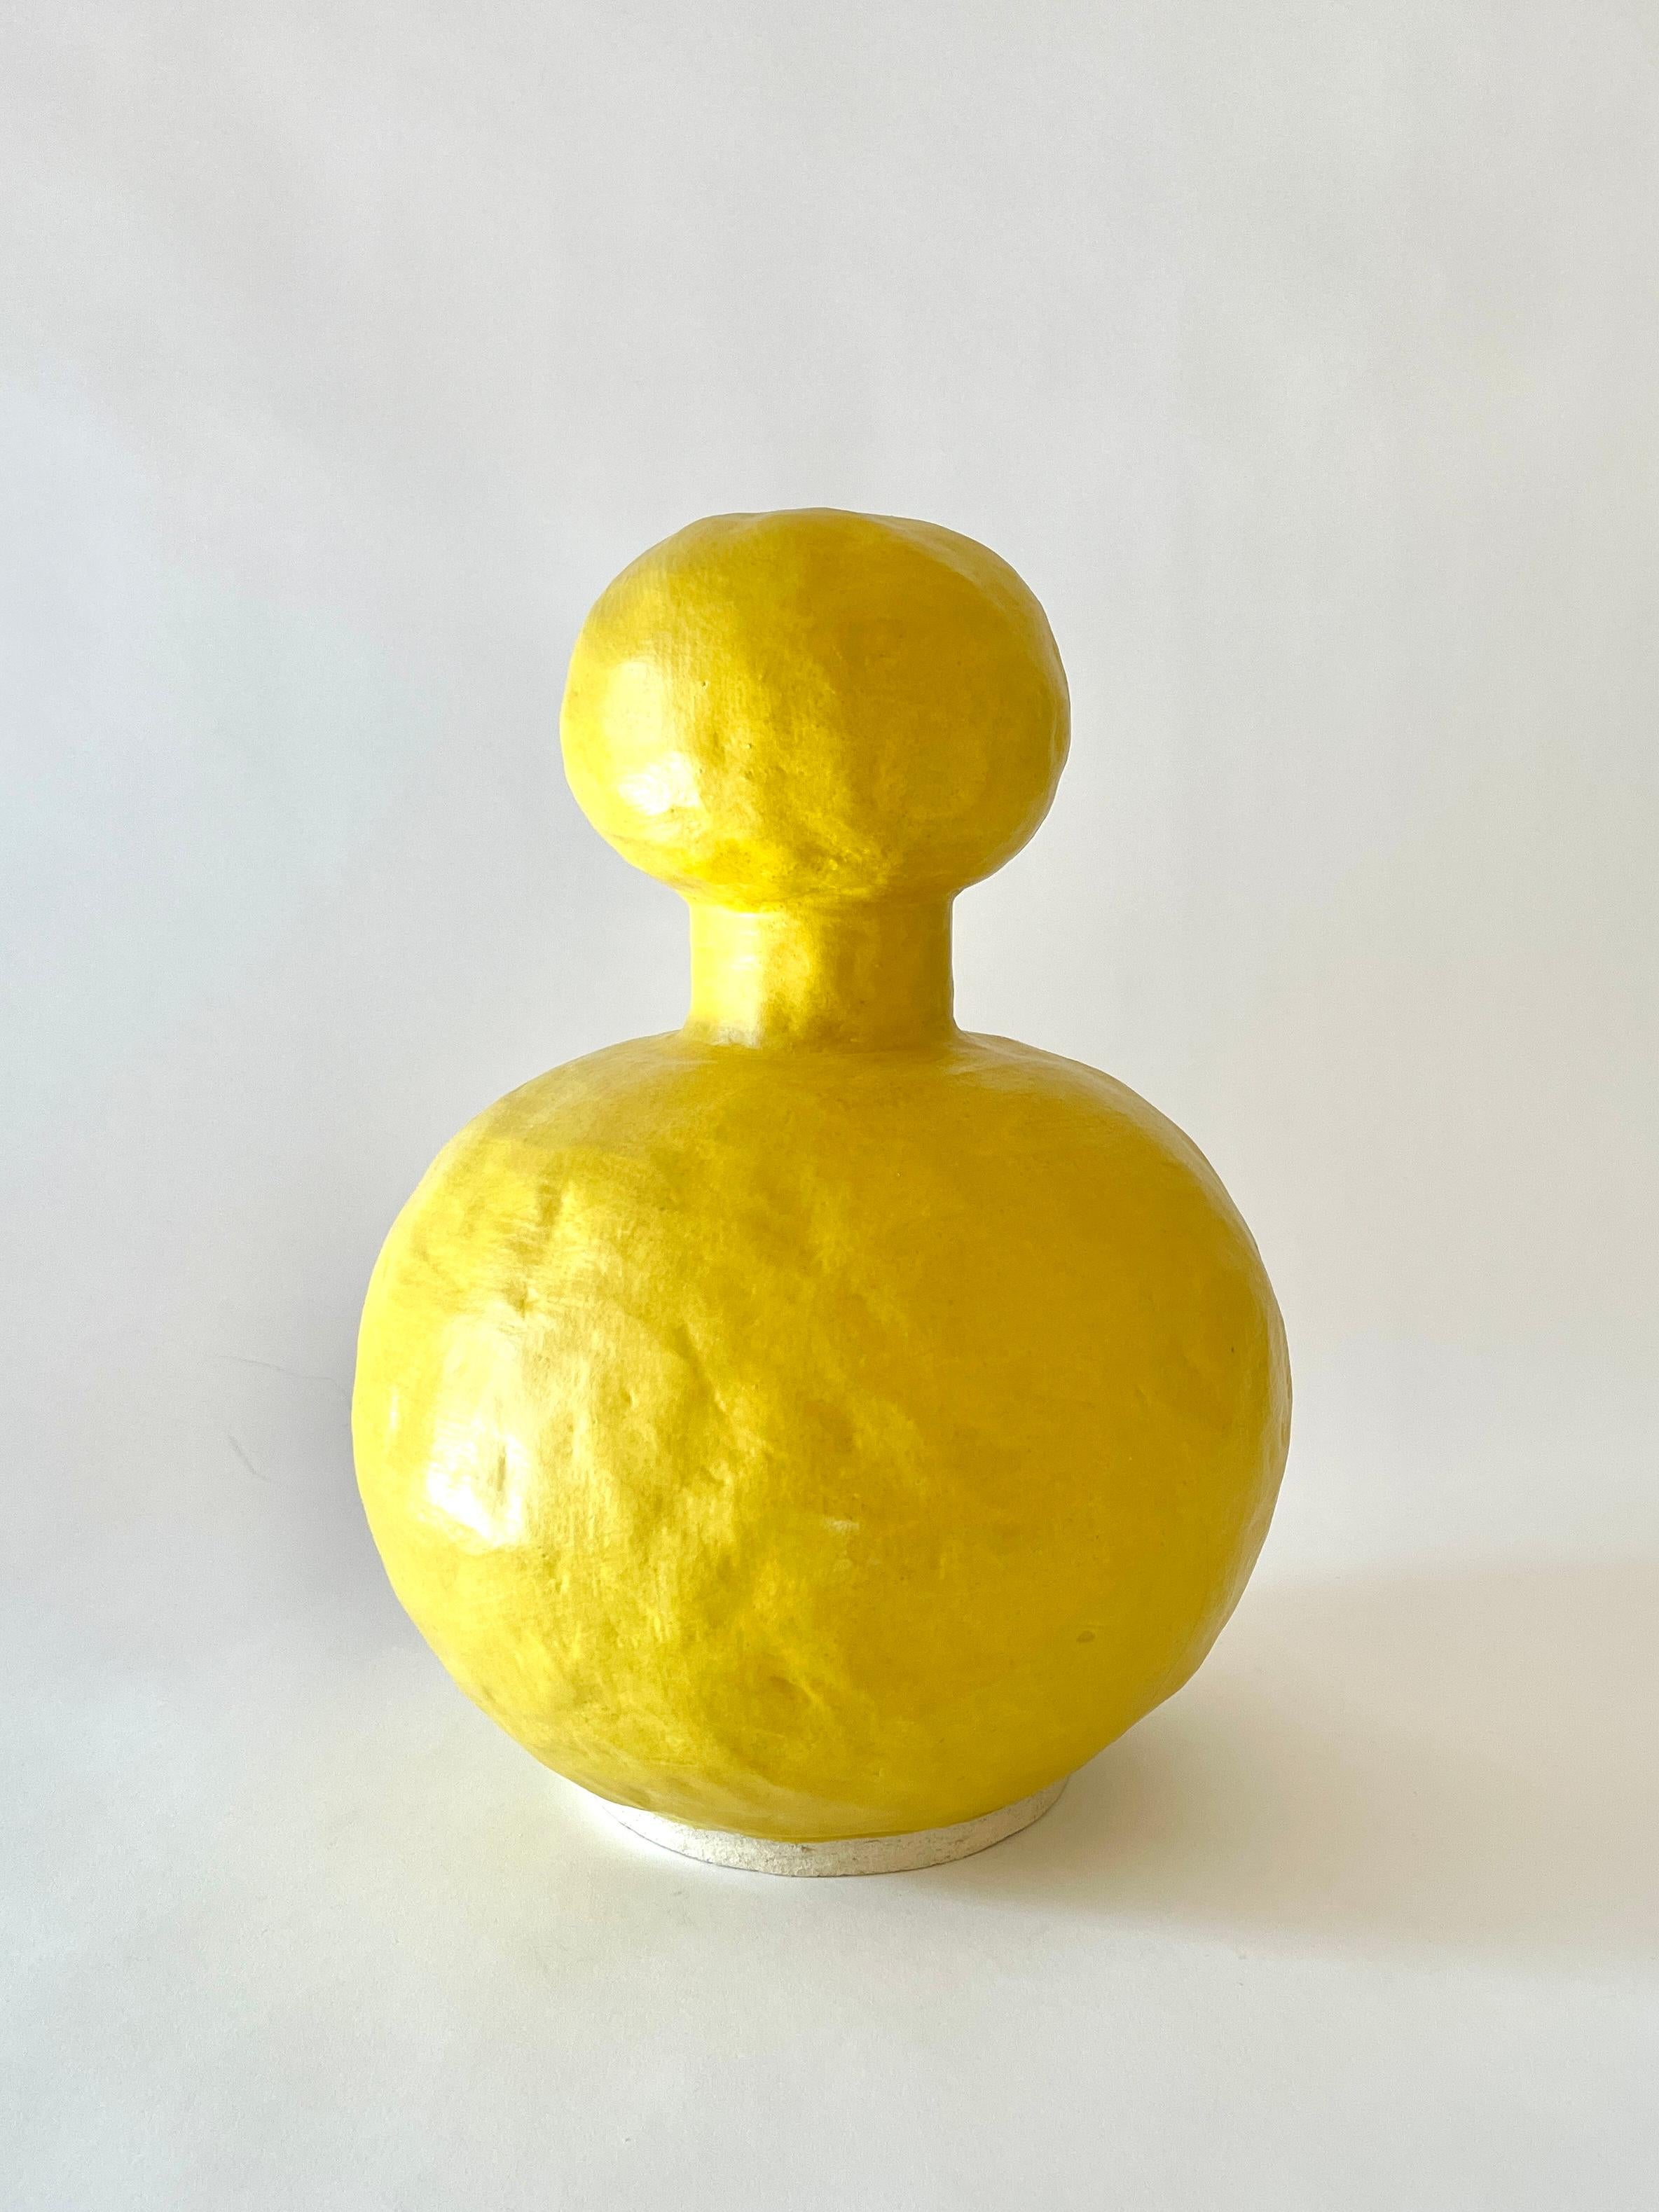 Jules Yellow vase by Meg Morrison
Materials: Ceramic.
Dimensions: Ø 23 x H 32 cm.

Available in Black, White, Yellow and Pink finishes. All sizes are approximate. Although vases are watertight condensation may form on the bottom. Please protect